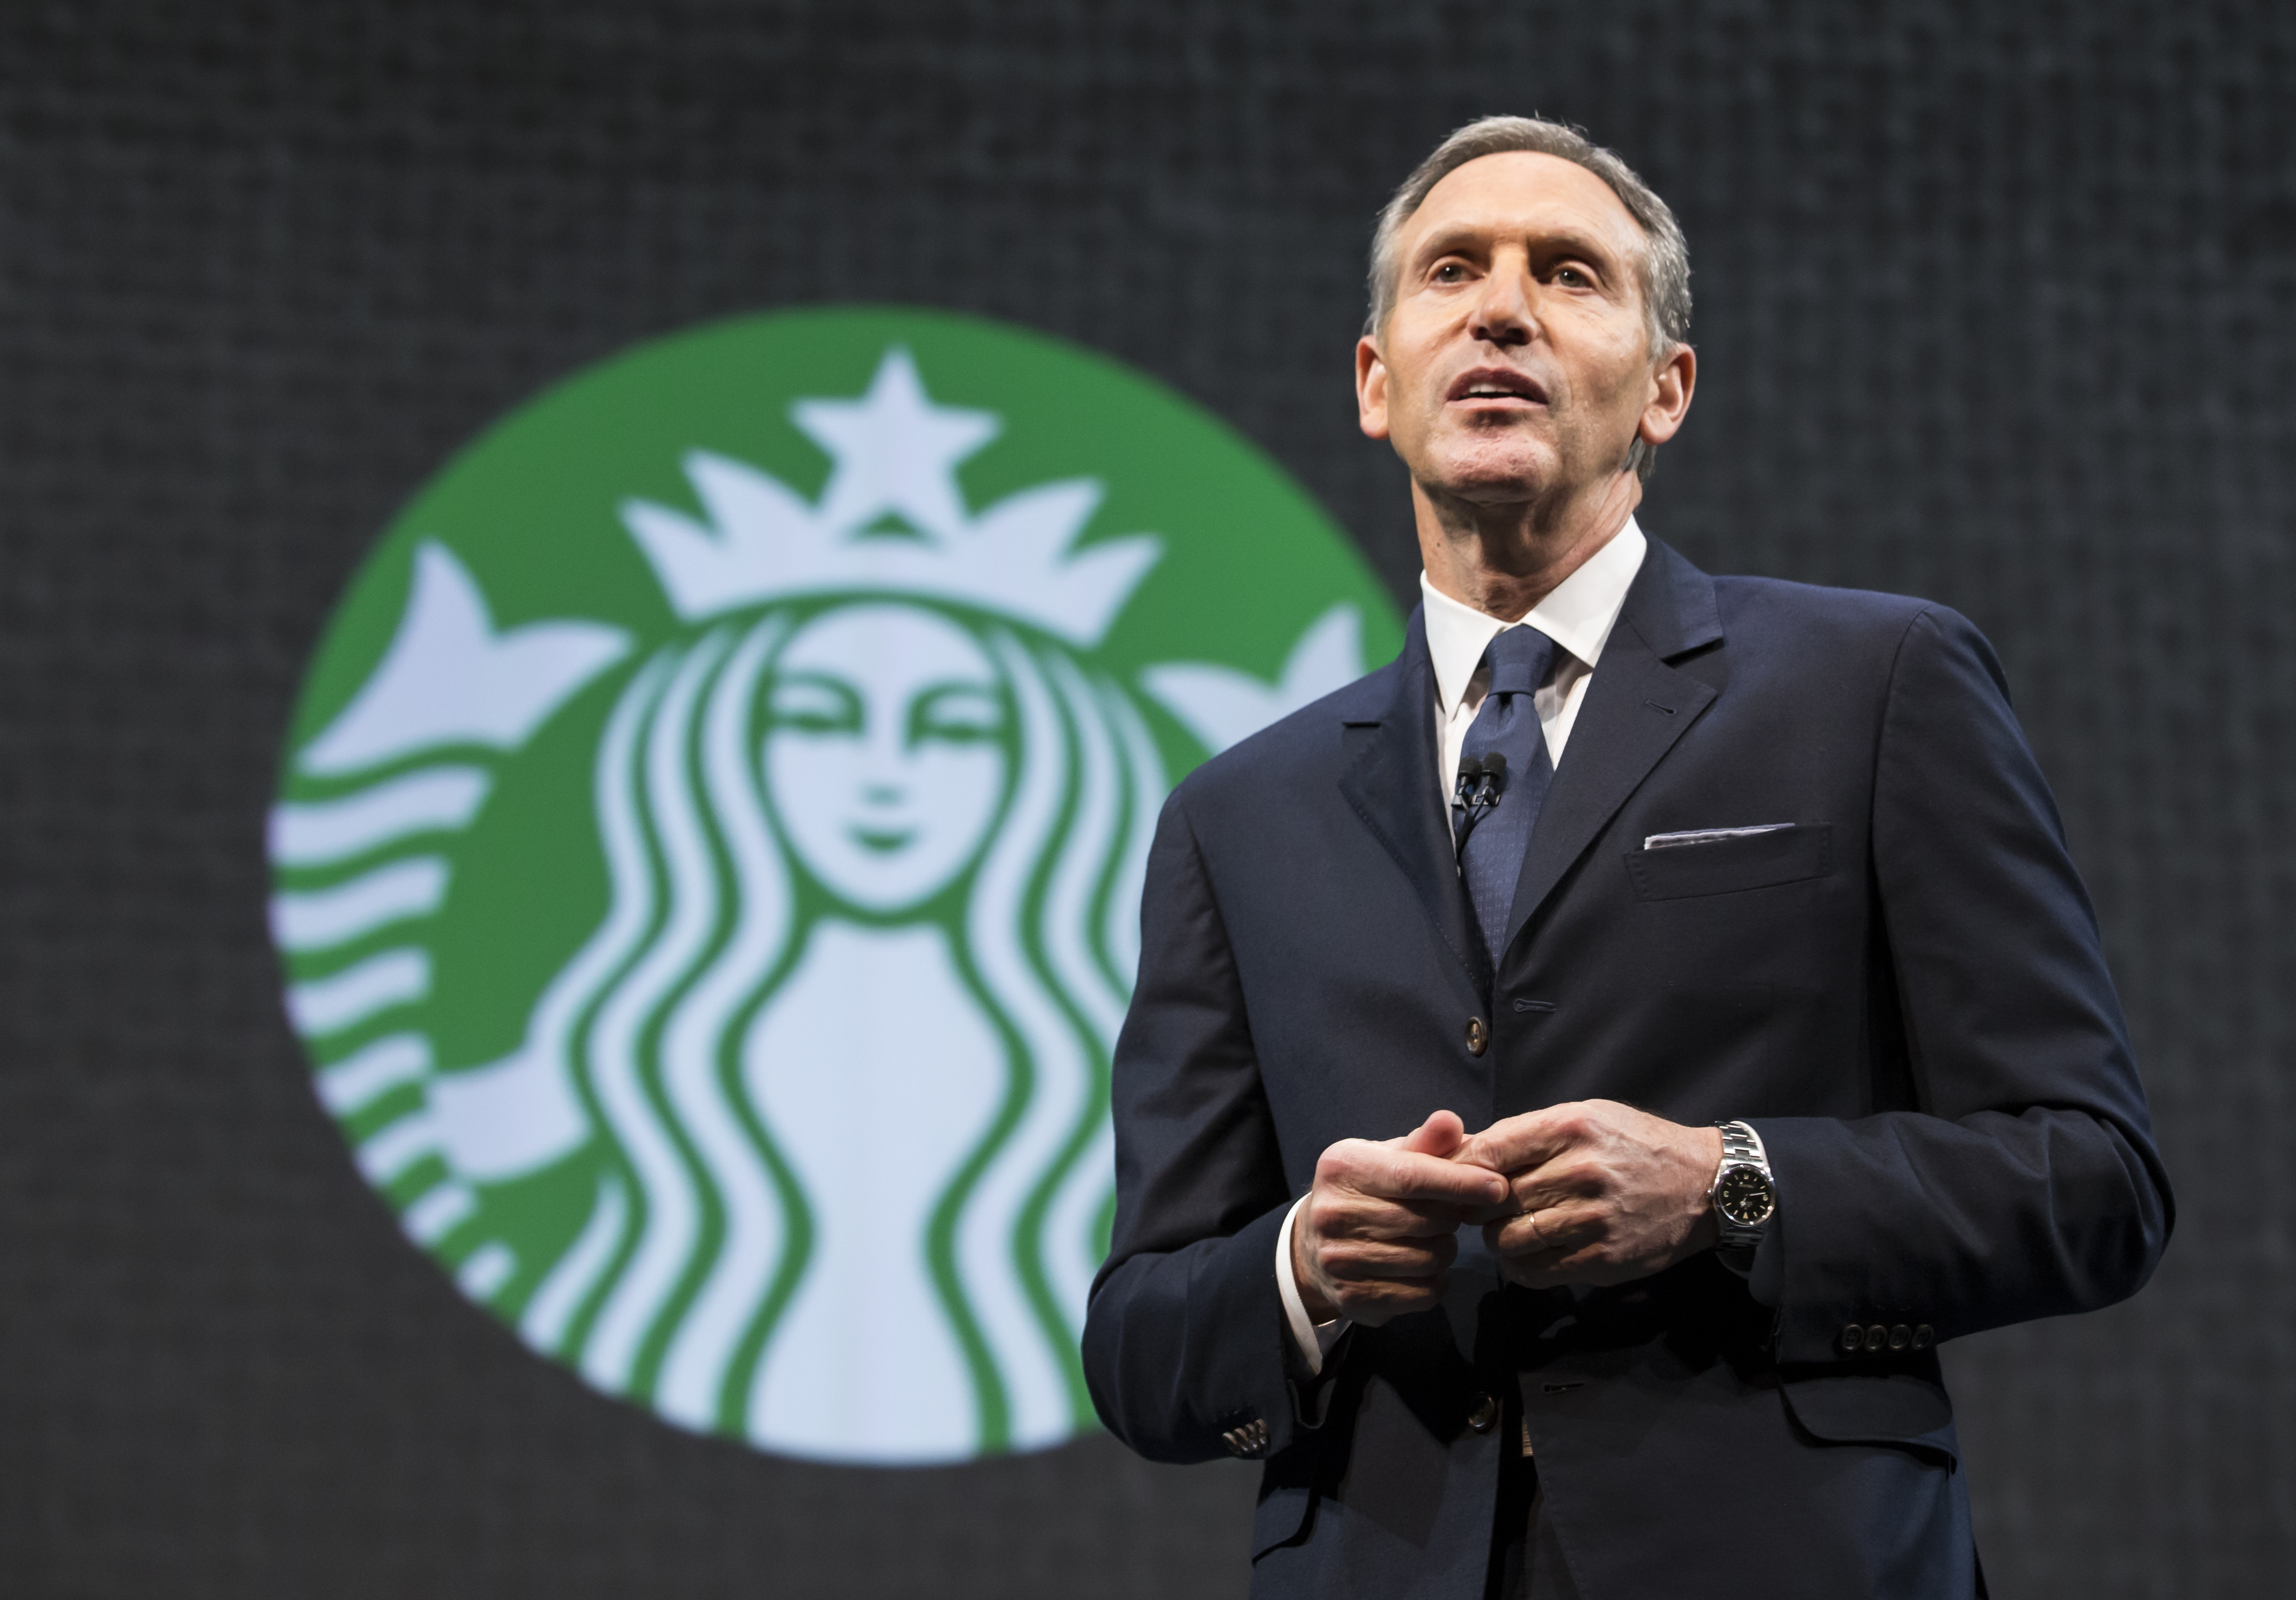 Starbucks Chairman and CEO Howard Schultz speaks during Starbucks' annual shareholders meeting on March 18, 2015 in Seattle. (Stephen Brashear—Getty Images)